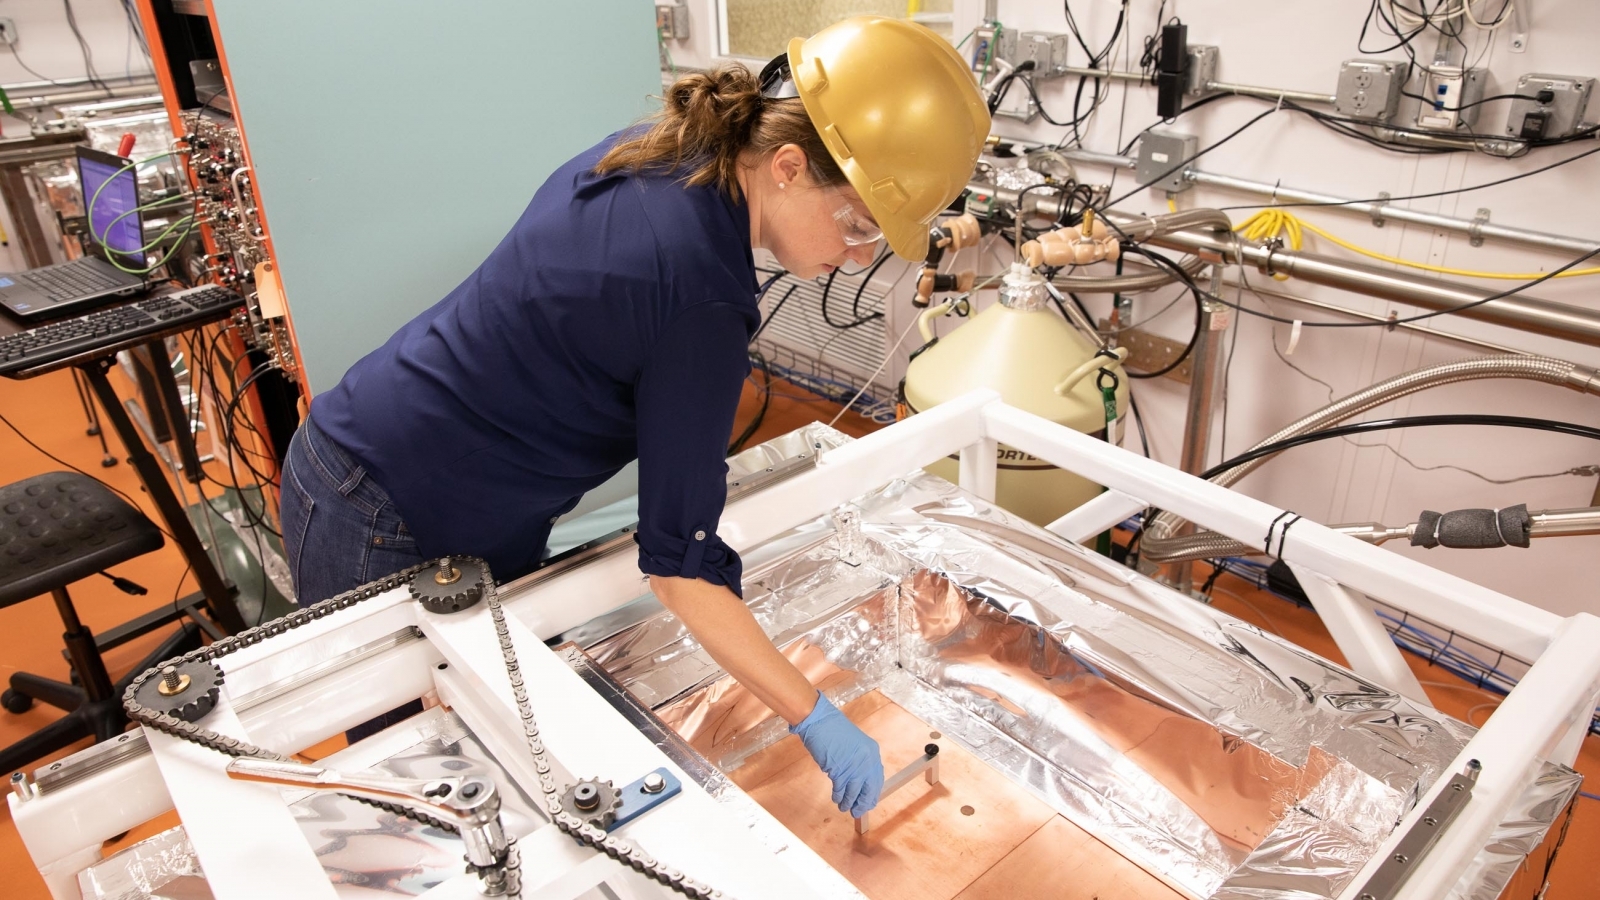 Image - Brianna Mount, assistant professor of physics at Black Hills State University, at work in the Black Hills State University Underground Campus (BHUC) at Sanford Lab, where components of the LUX-ZEPLIN experiment were tested to learn the background radioactivity of the materials. (Credit: Matthew Kapust/Sanford Lab)